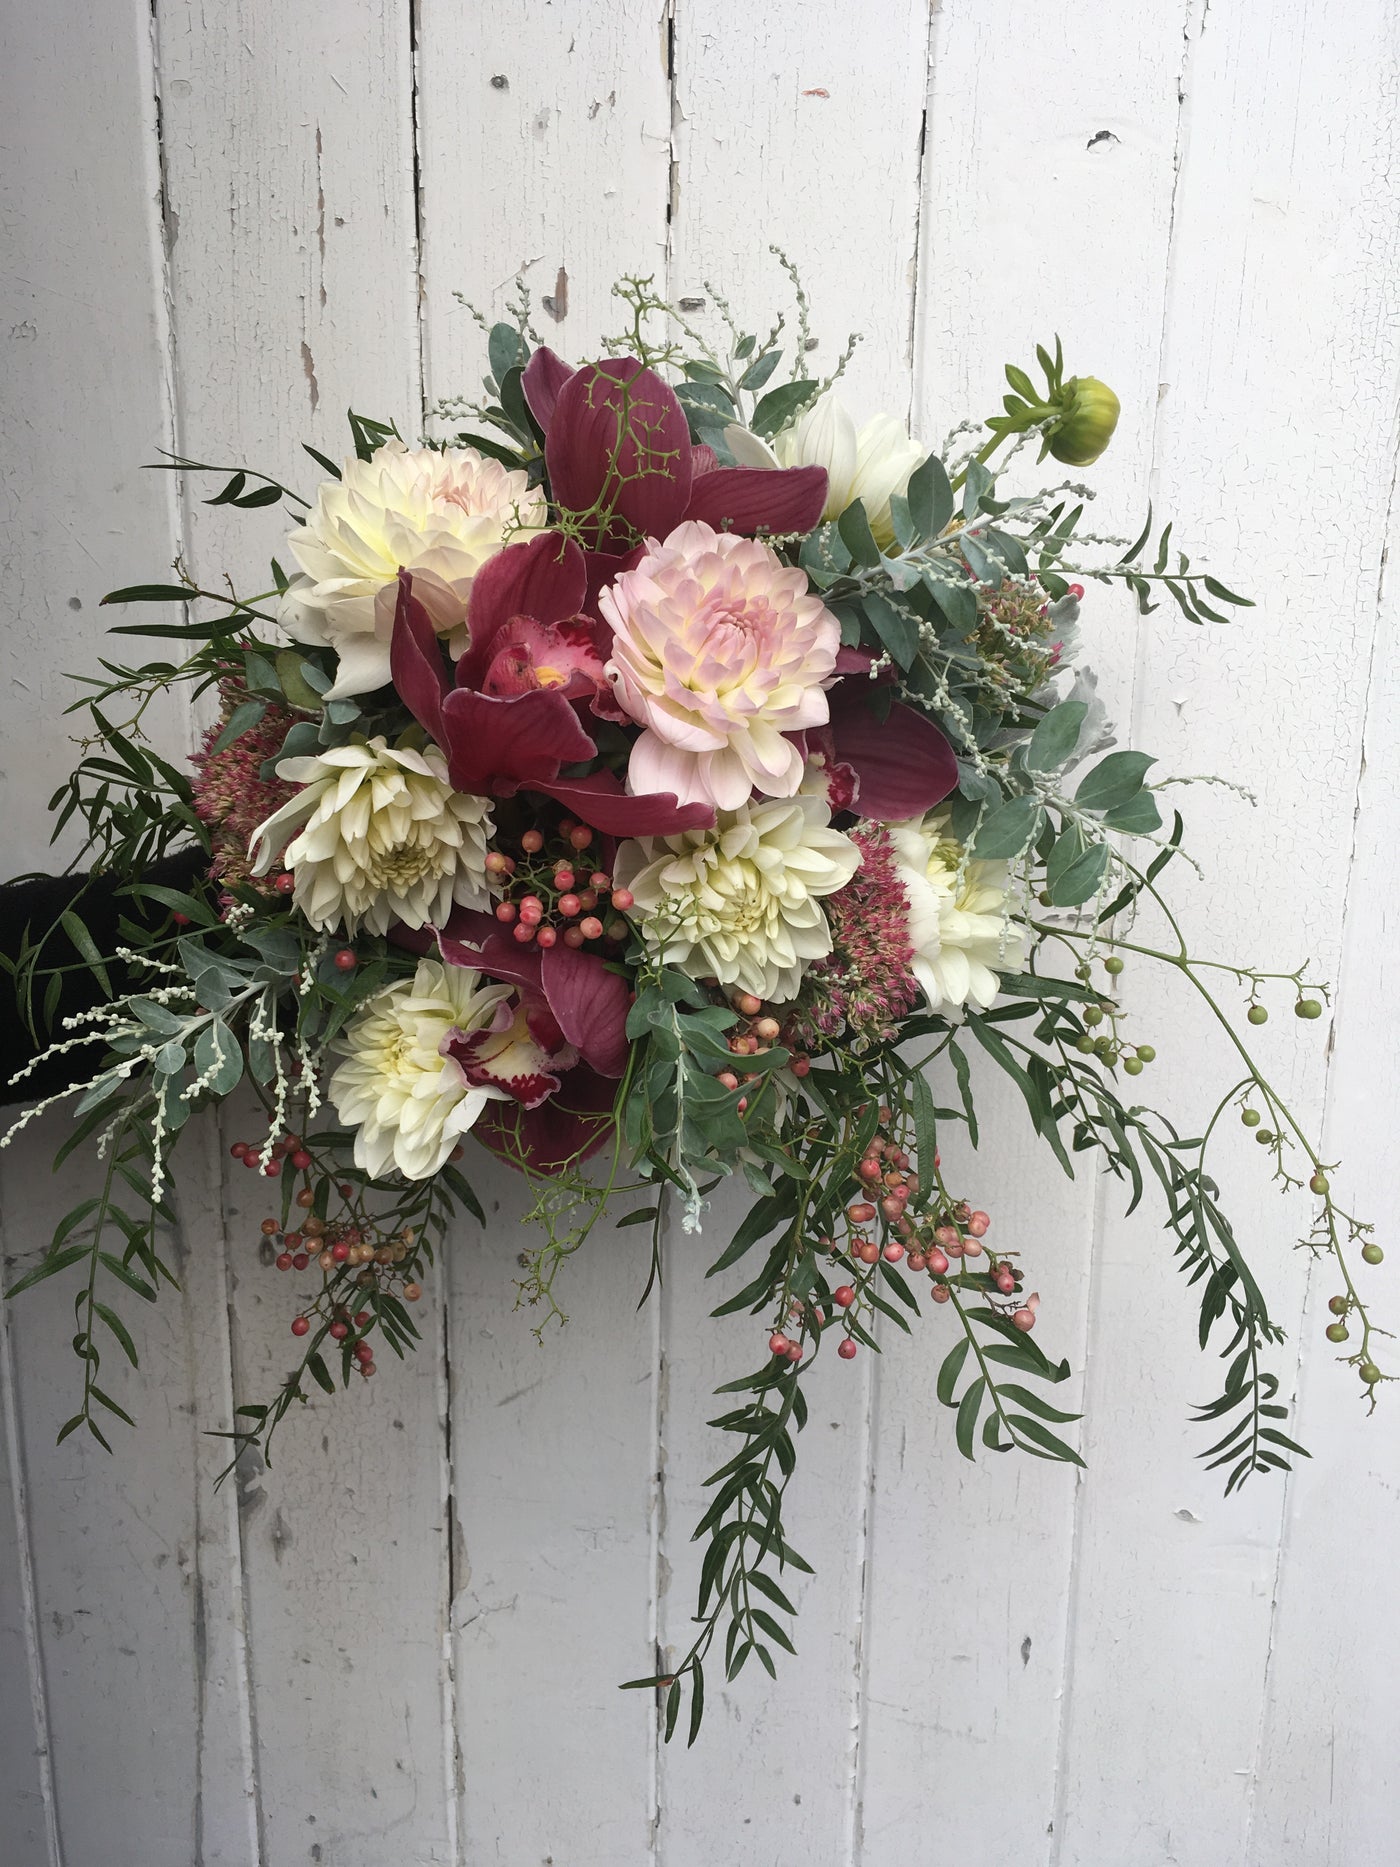 Antique themed posy